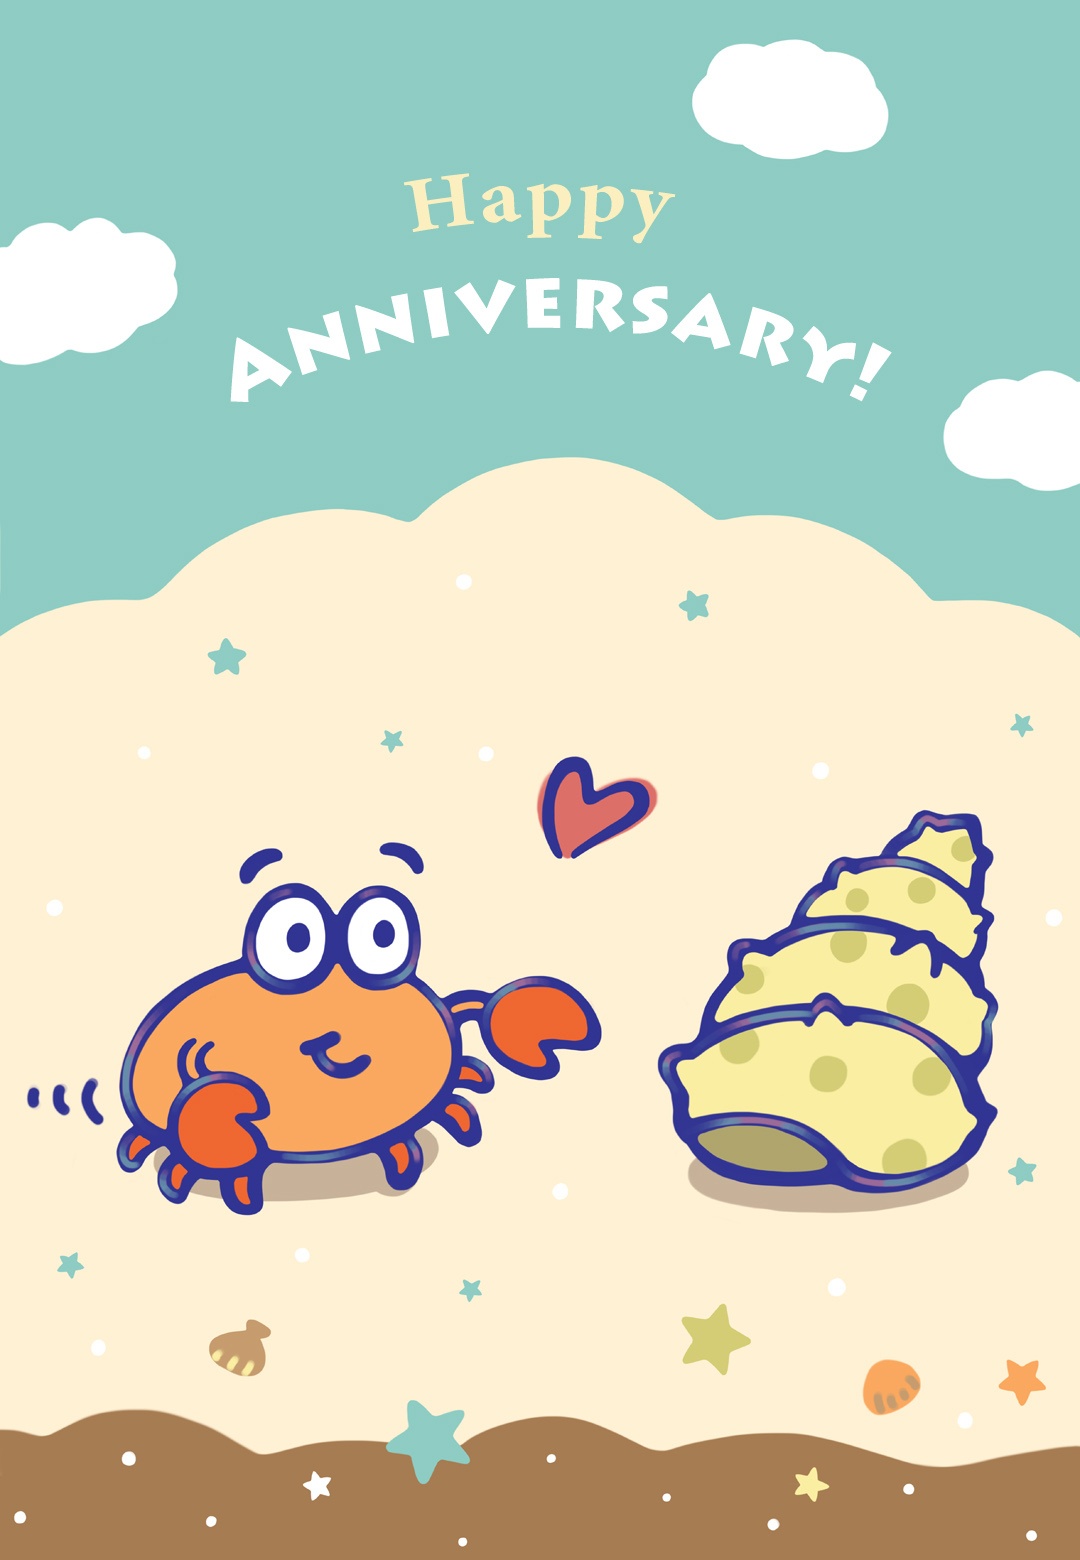 When I Found You - Happy Anniversary Card (Free) | Greetings Island - Free Printable Anniversary Cards